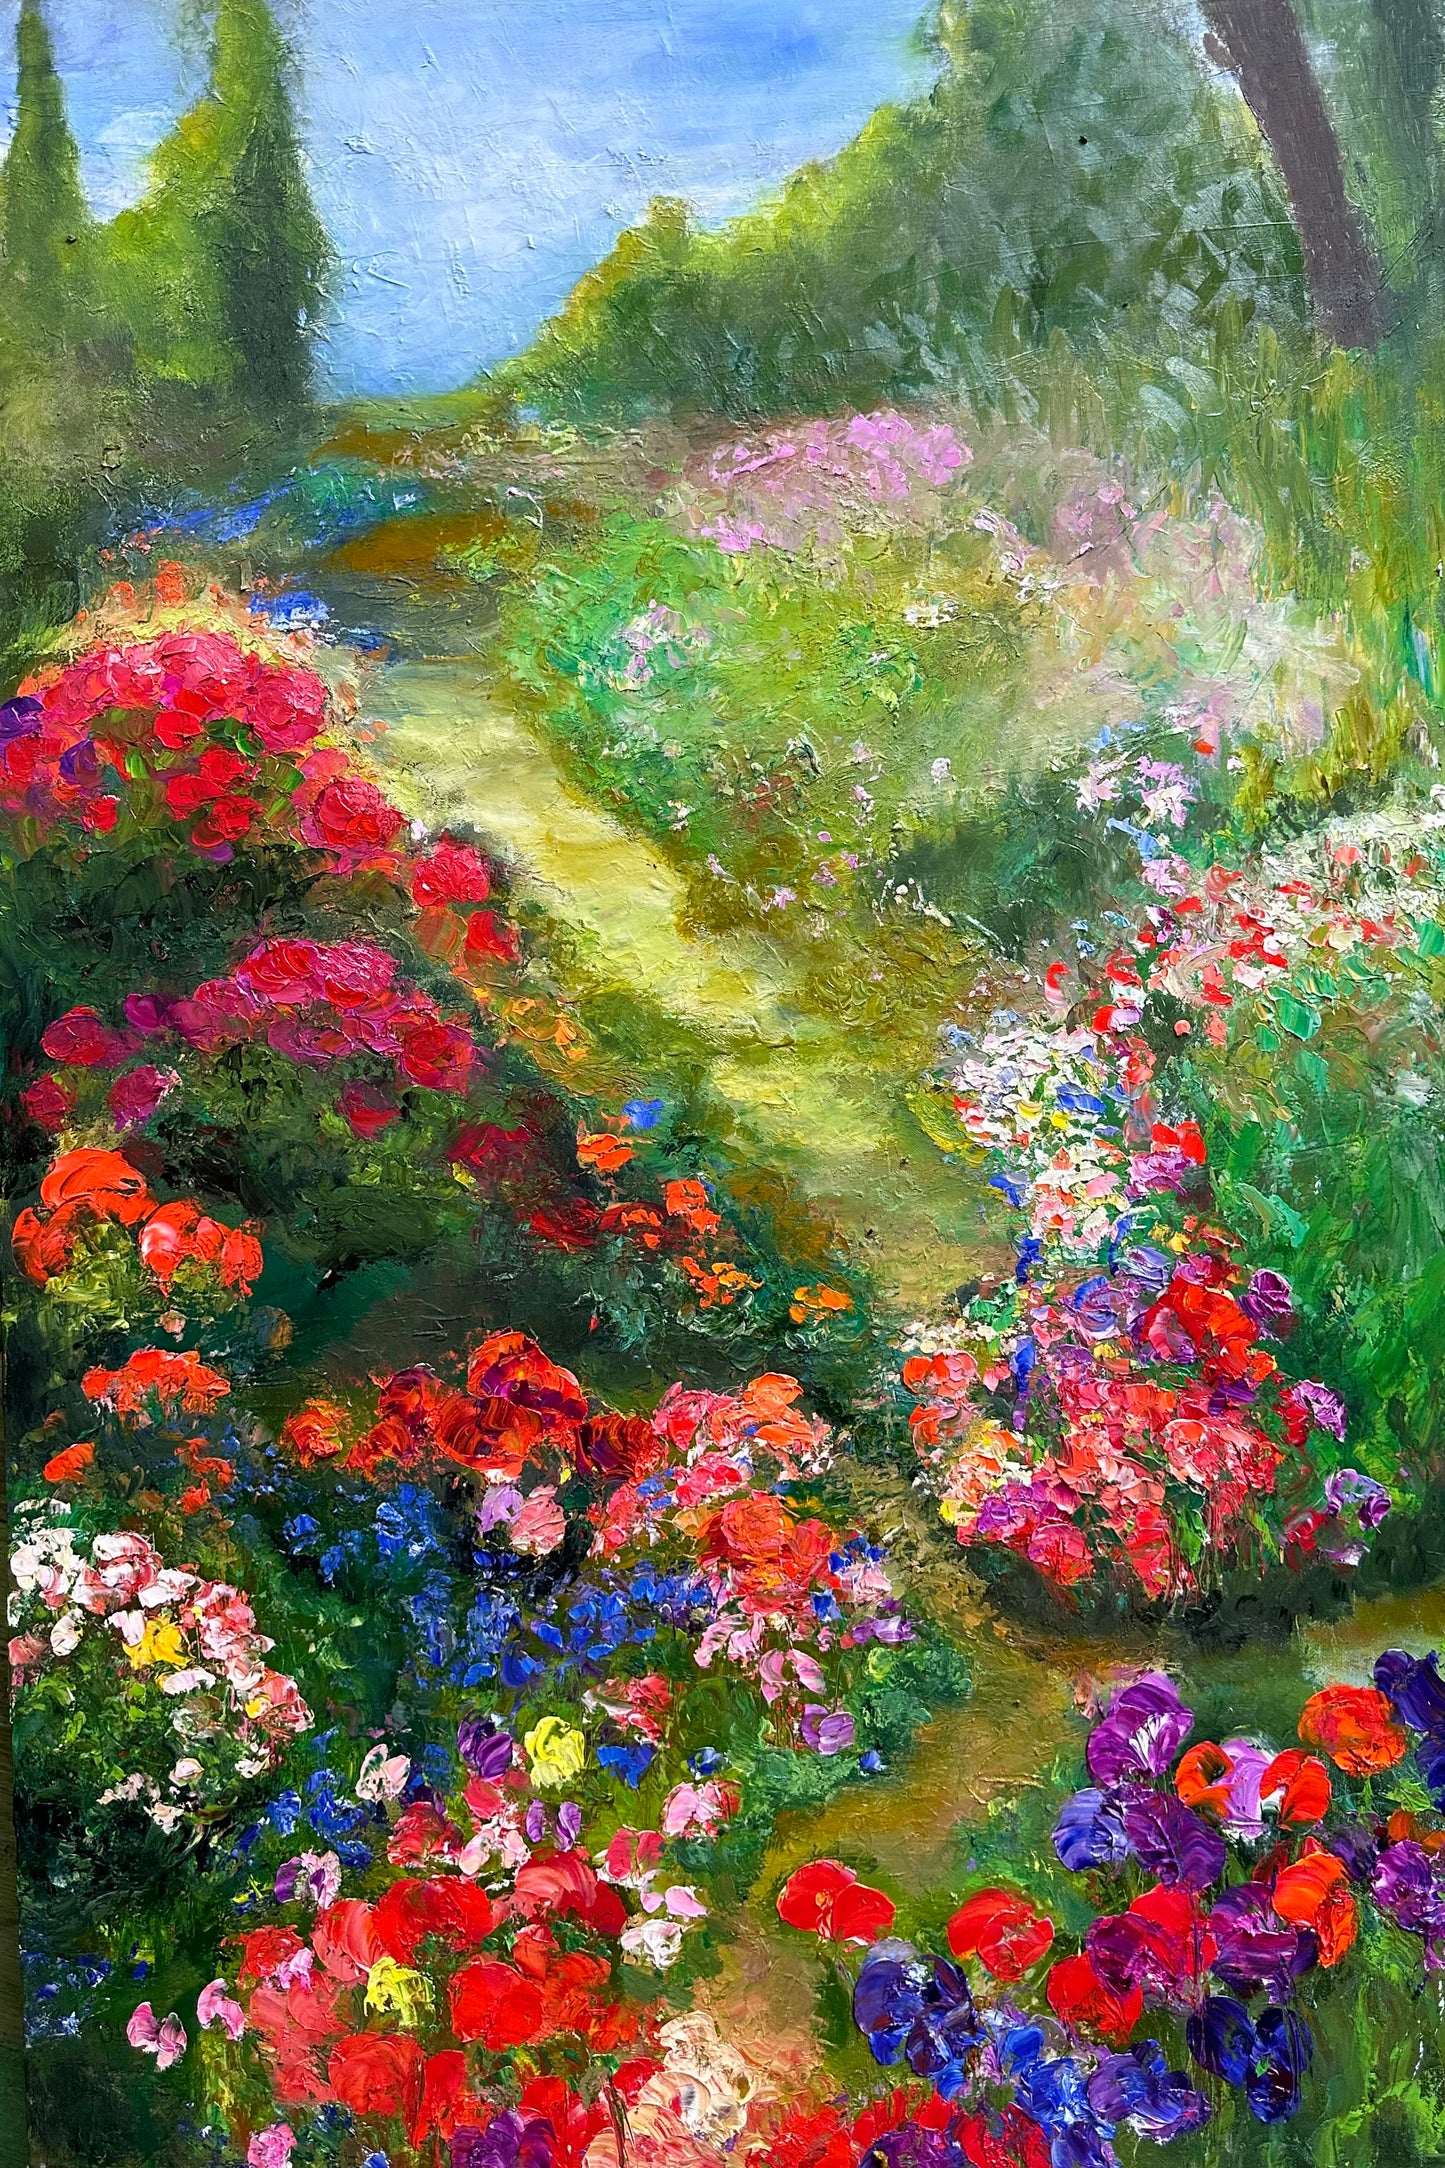 Abstract Impressionist oil painting of a whimsical path surrounded by flowers.